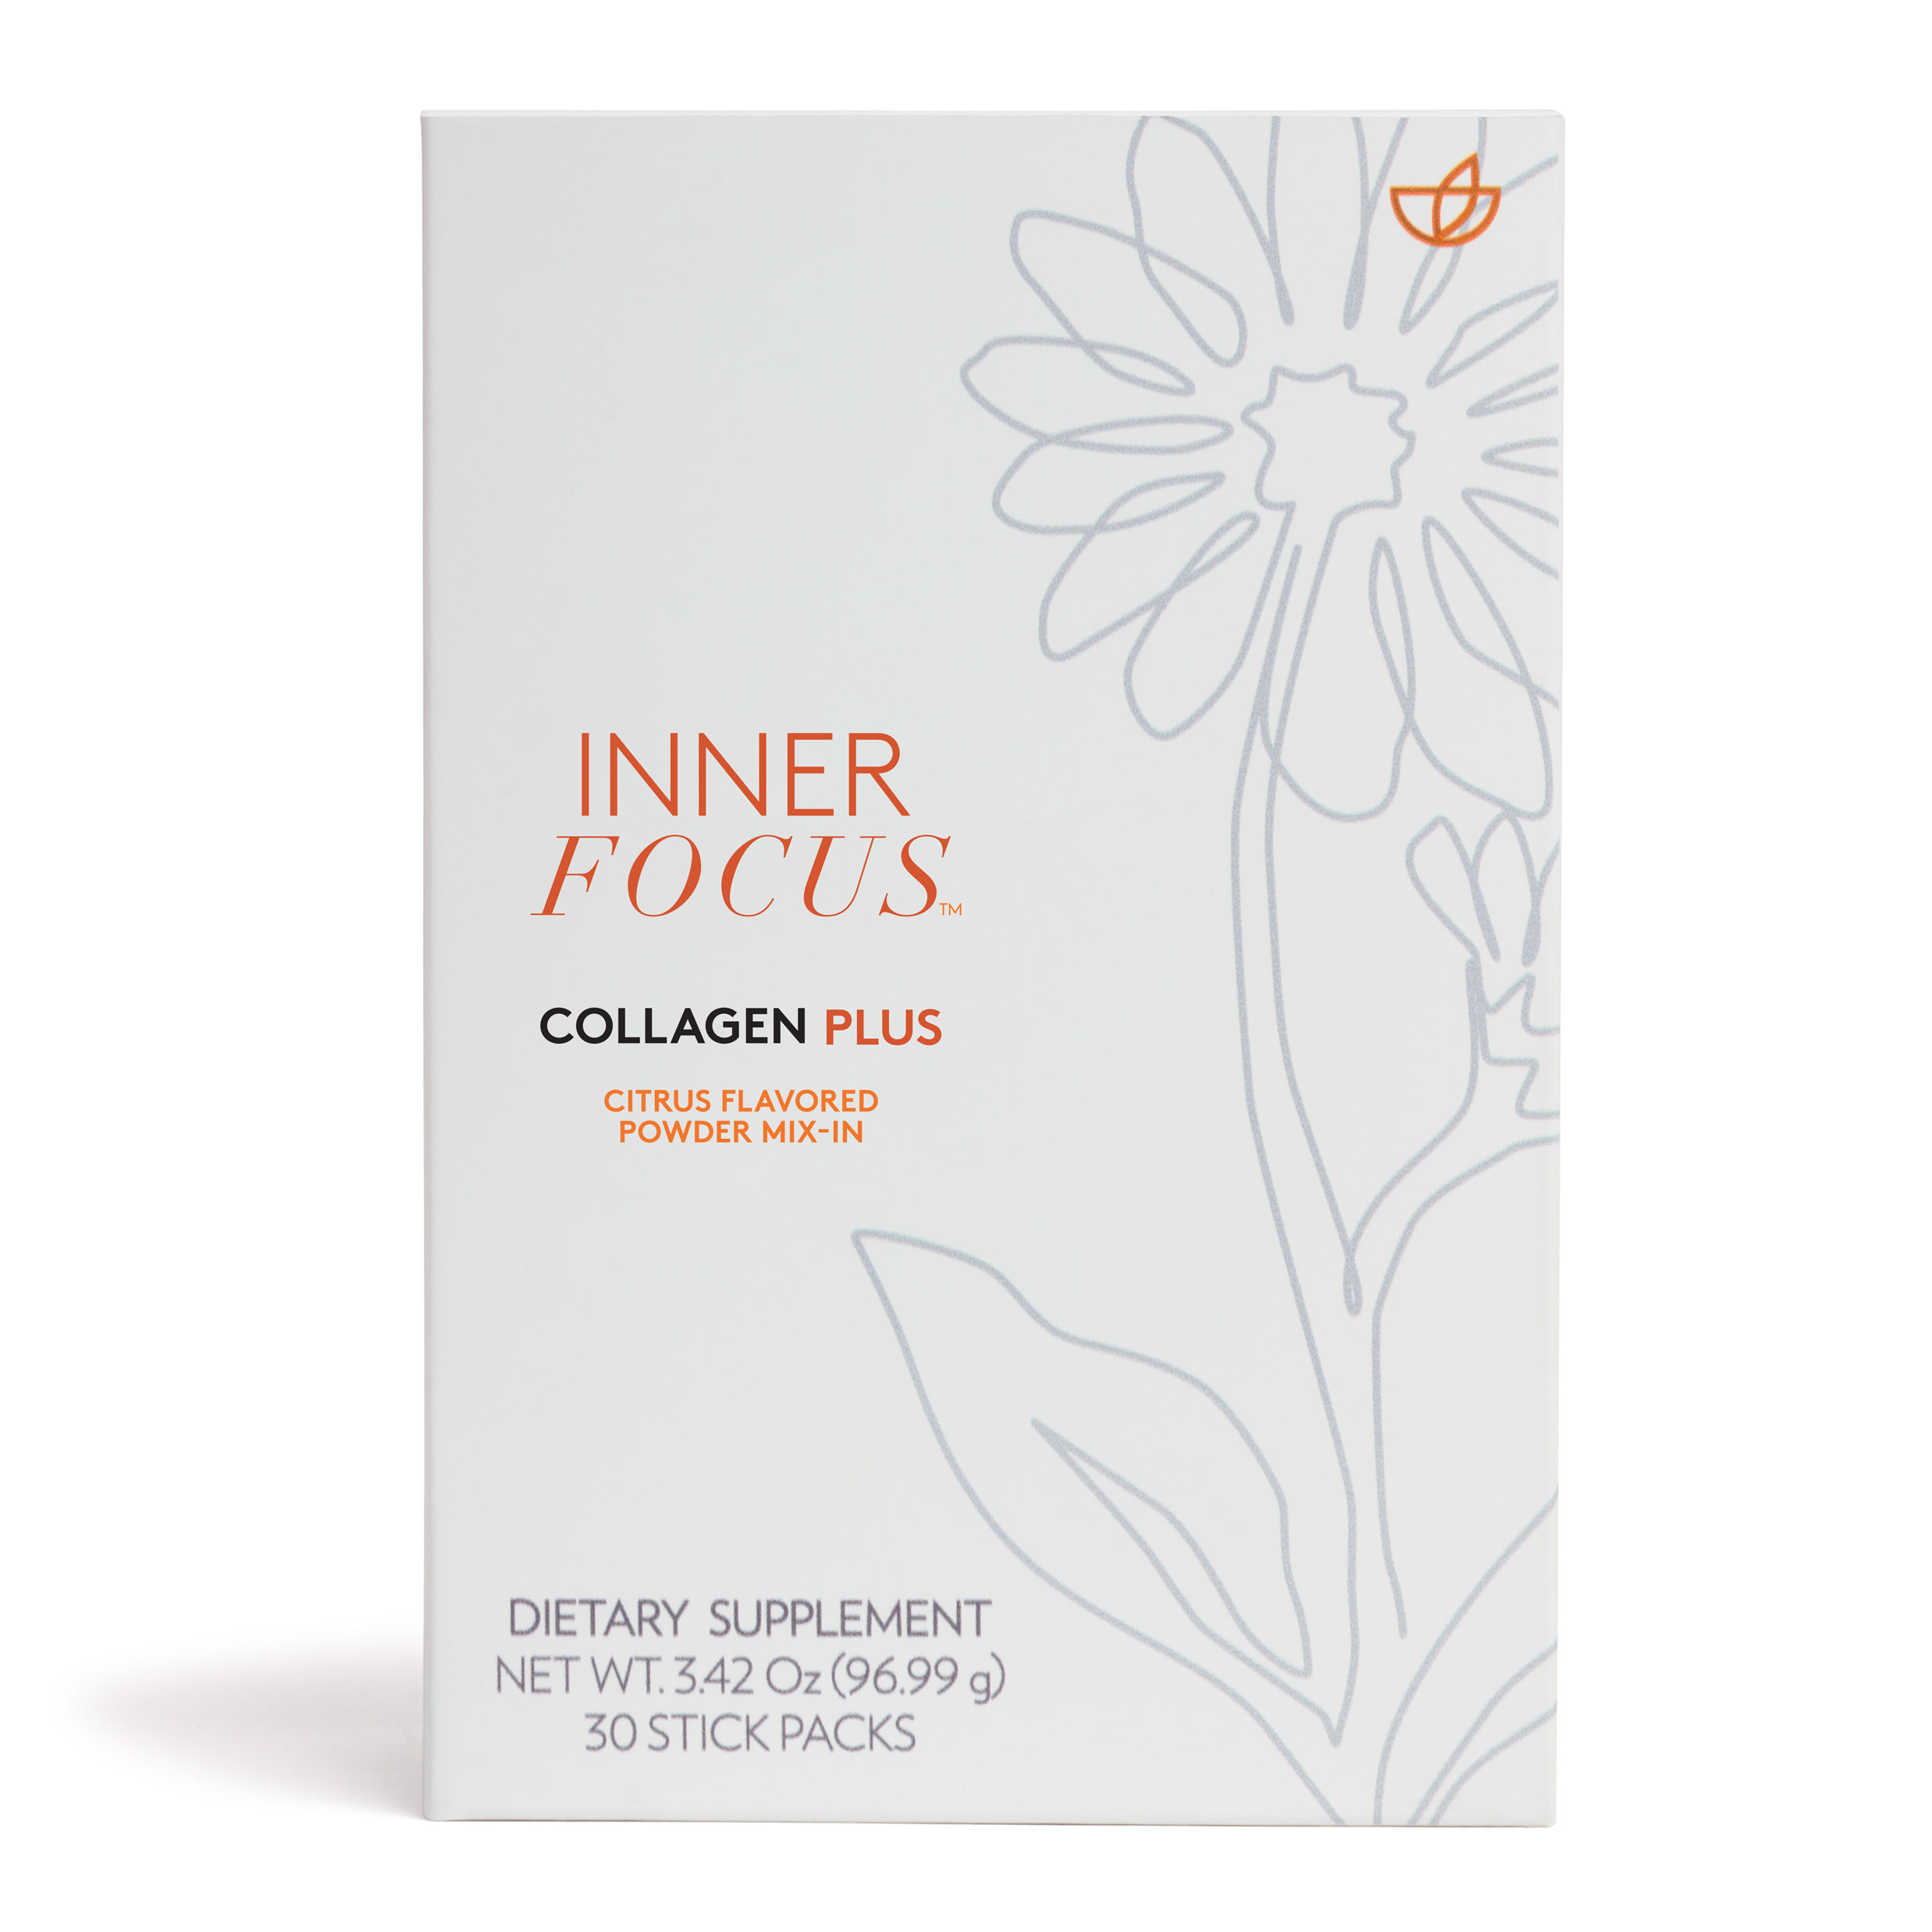 Rev Up Your Radiance With Pharmanex Inner Focus Collagen Plus, A Fountain  Of Youth In A Sachet